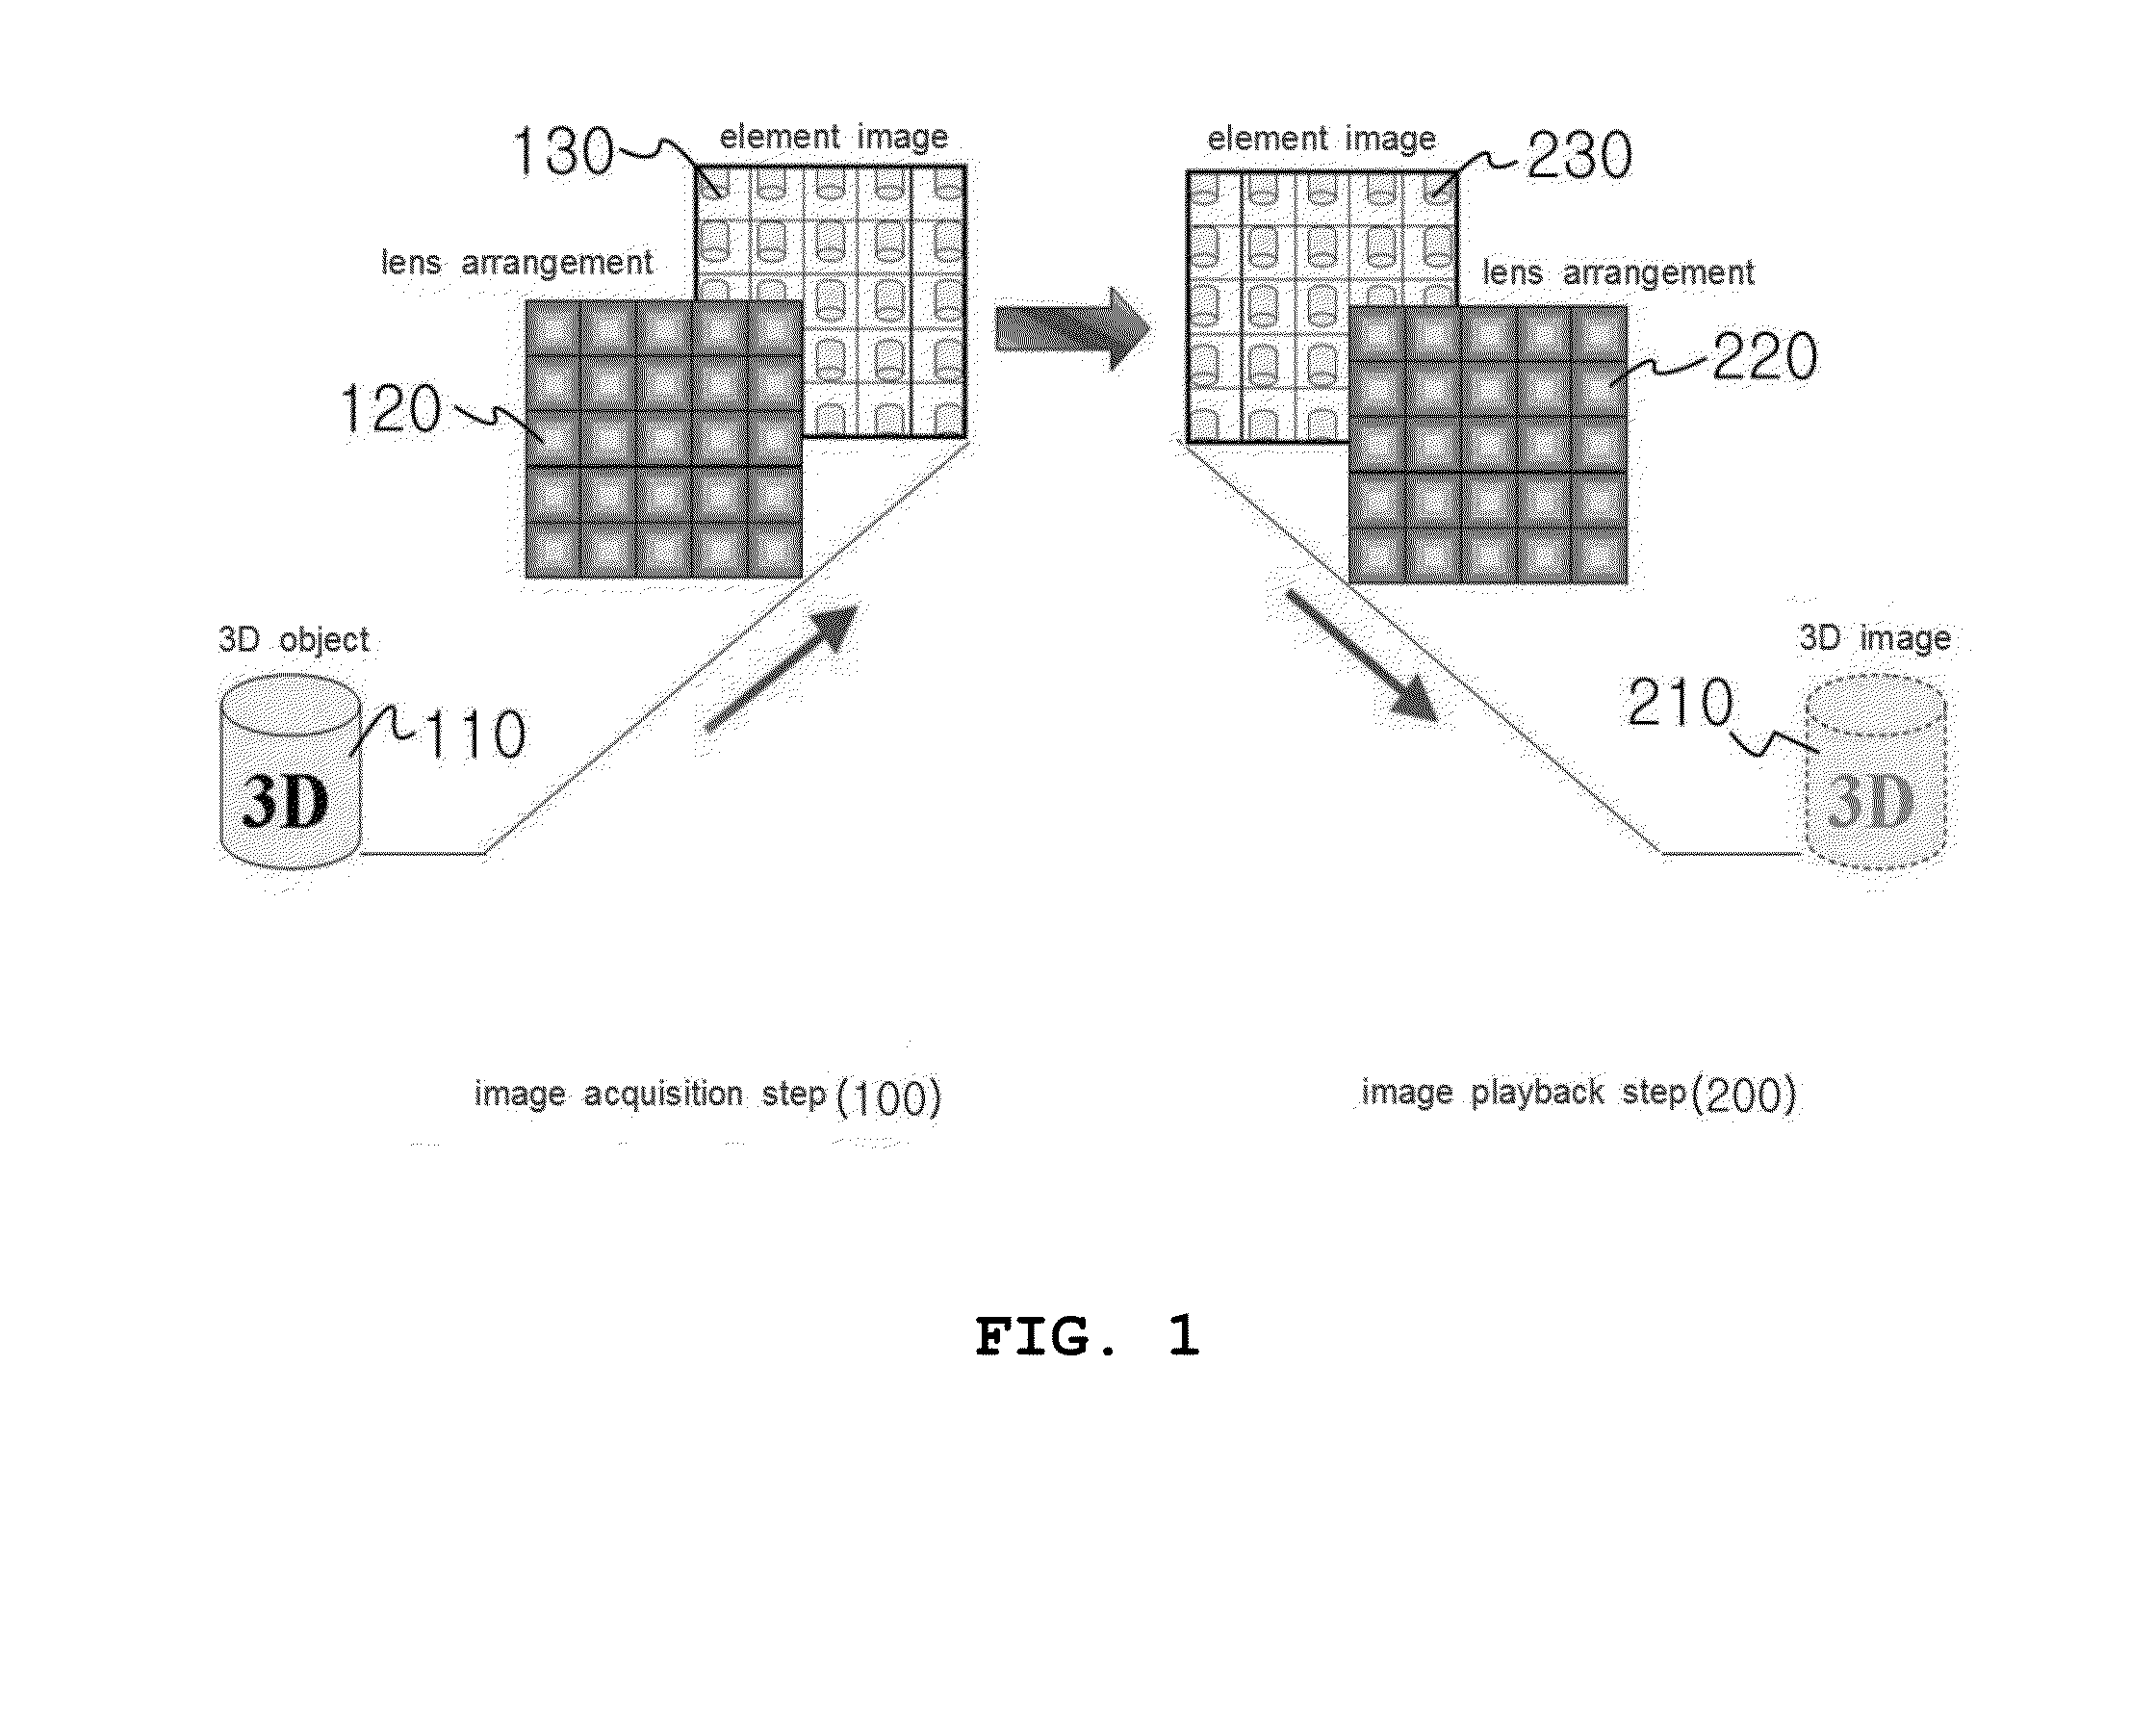 Method for displaying three-dimensional integral images using mask and time division multiplexing